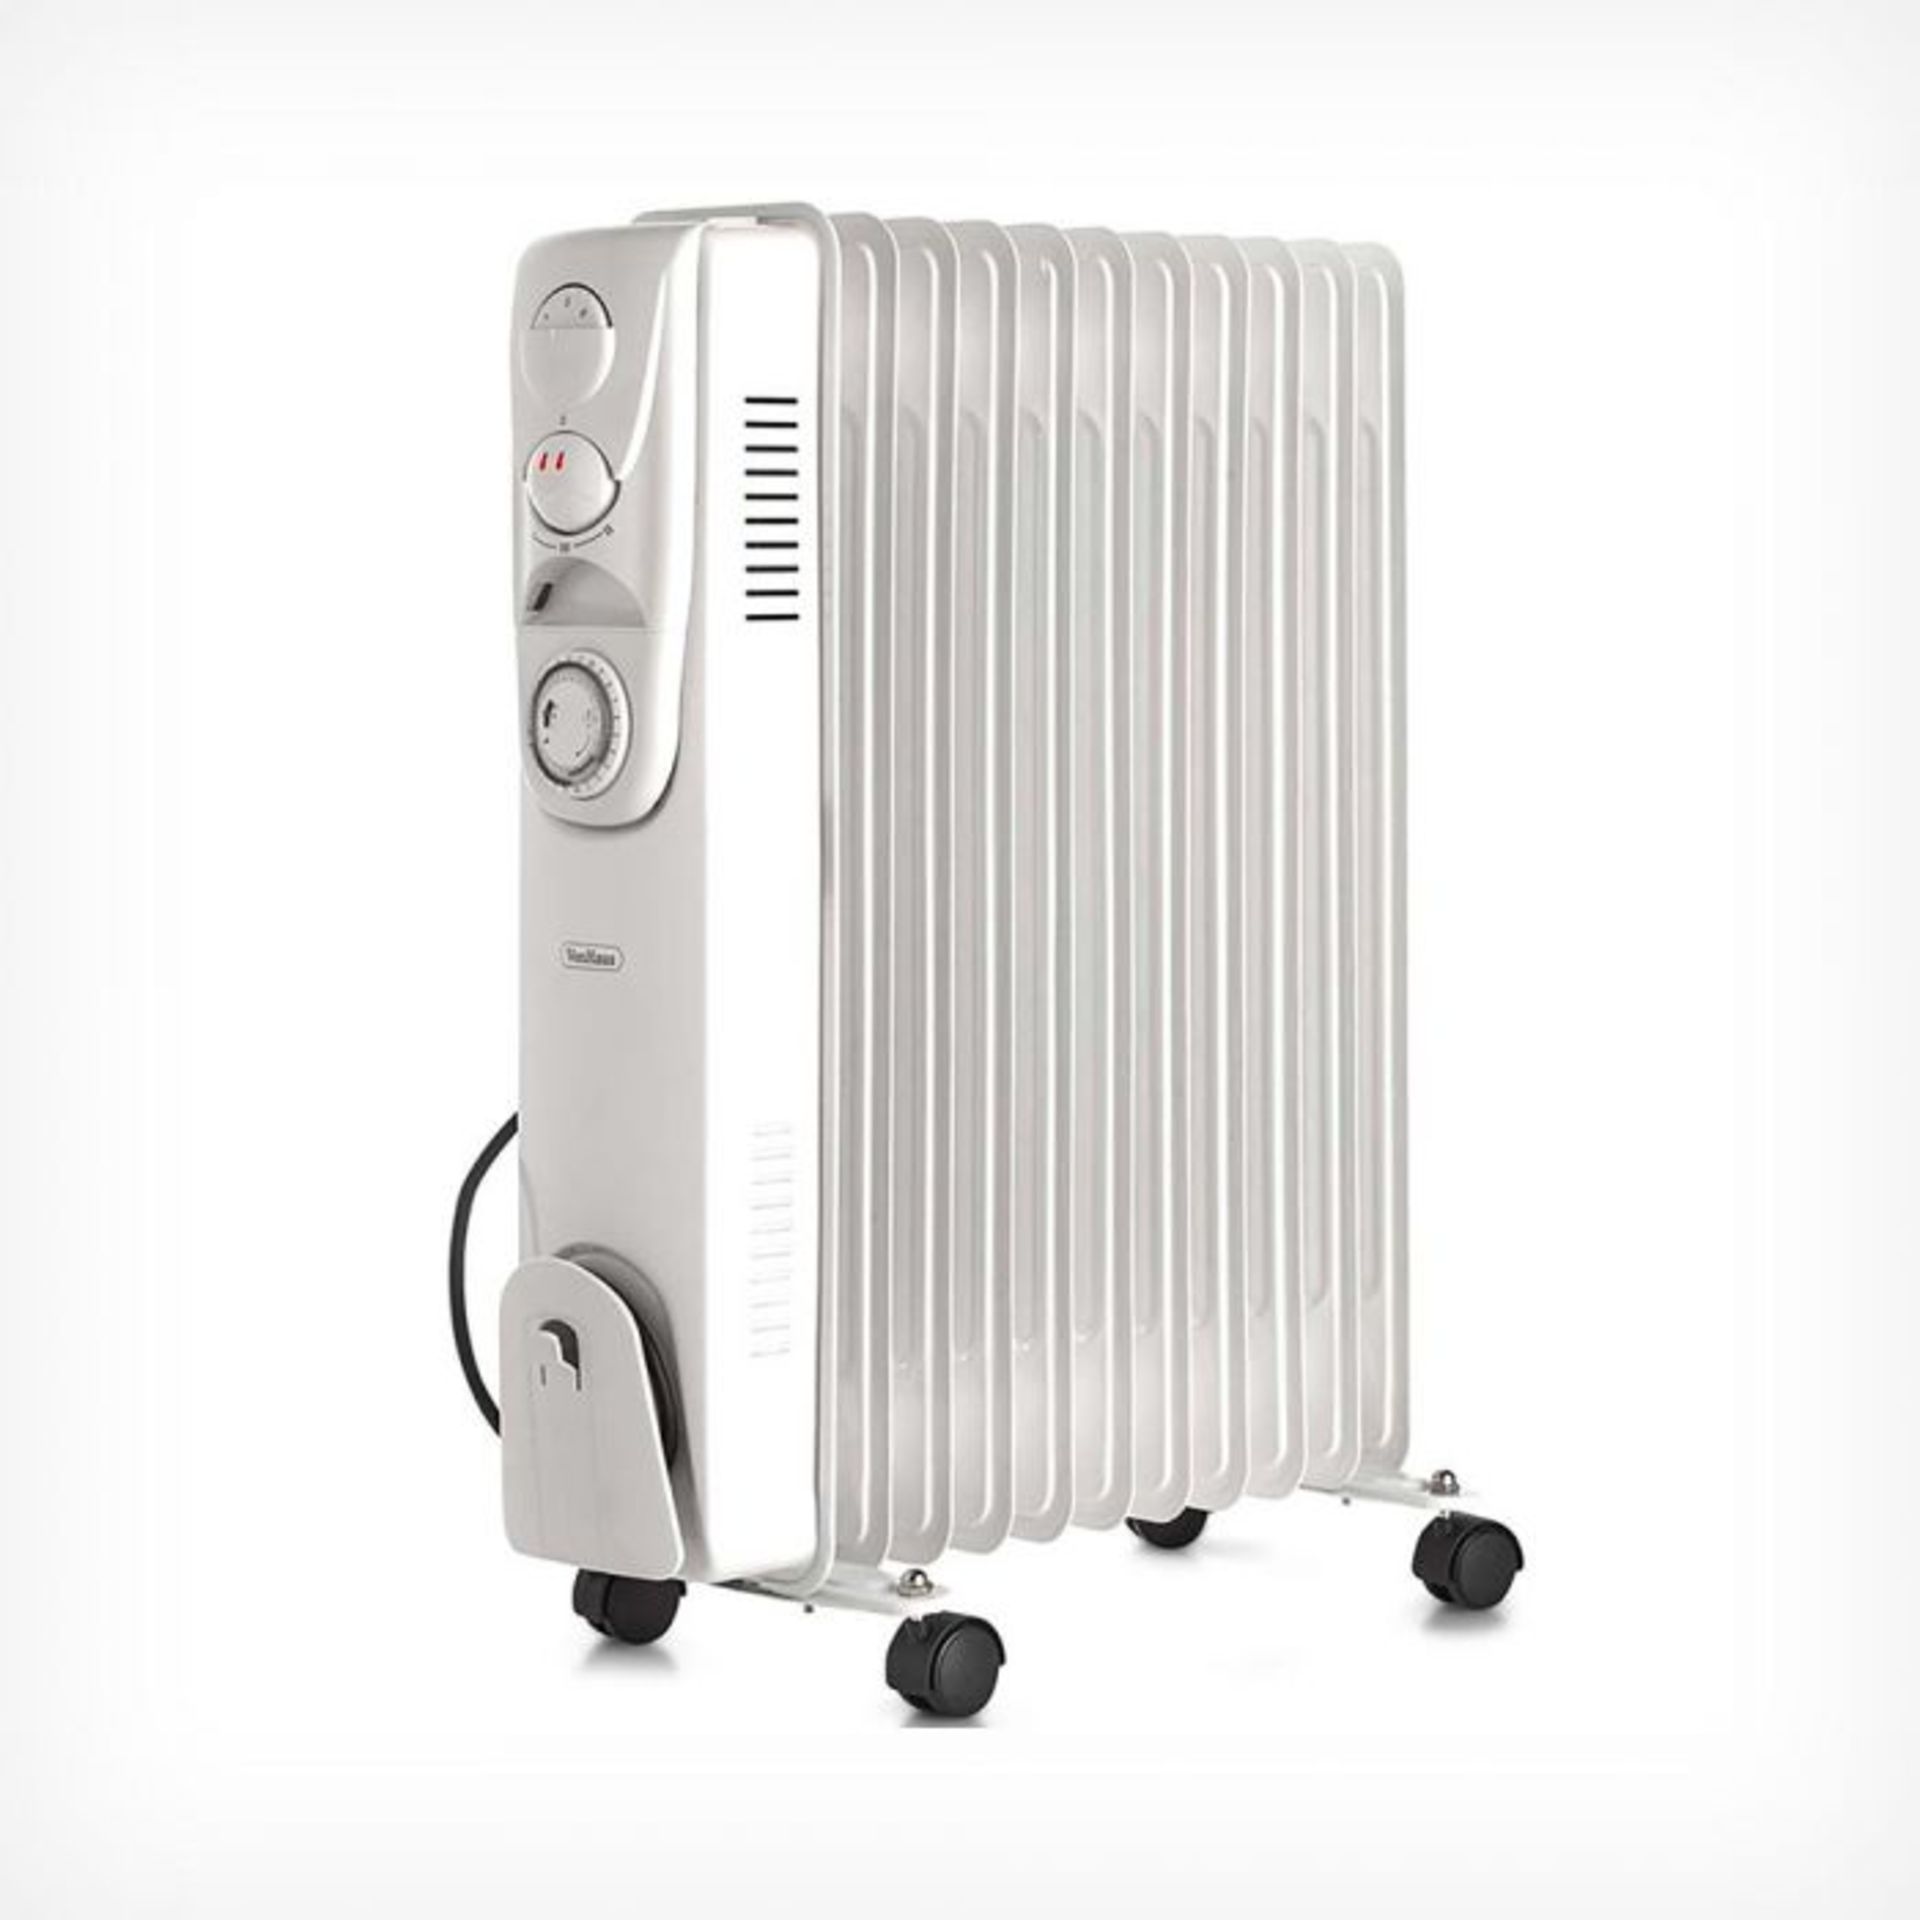 (V172) 11 Fin 2500W Oil Filled Radiator - White Suitable for areas up to 28 square metres 3 p... - Image 2 of 3